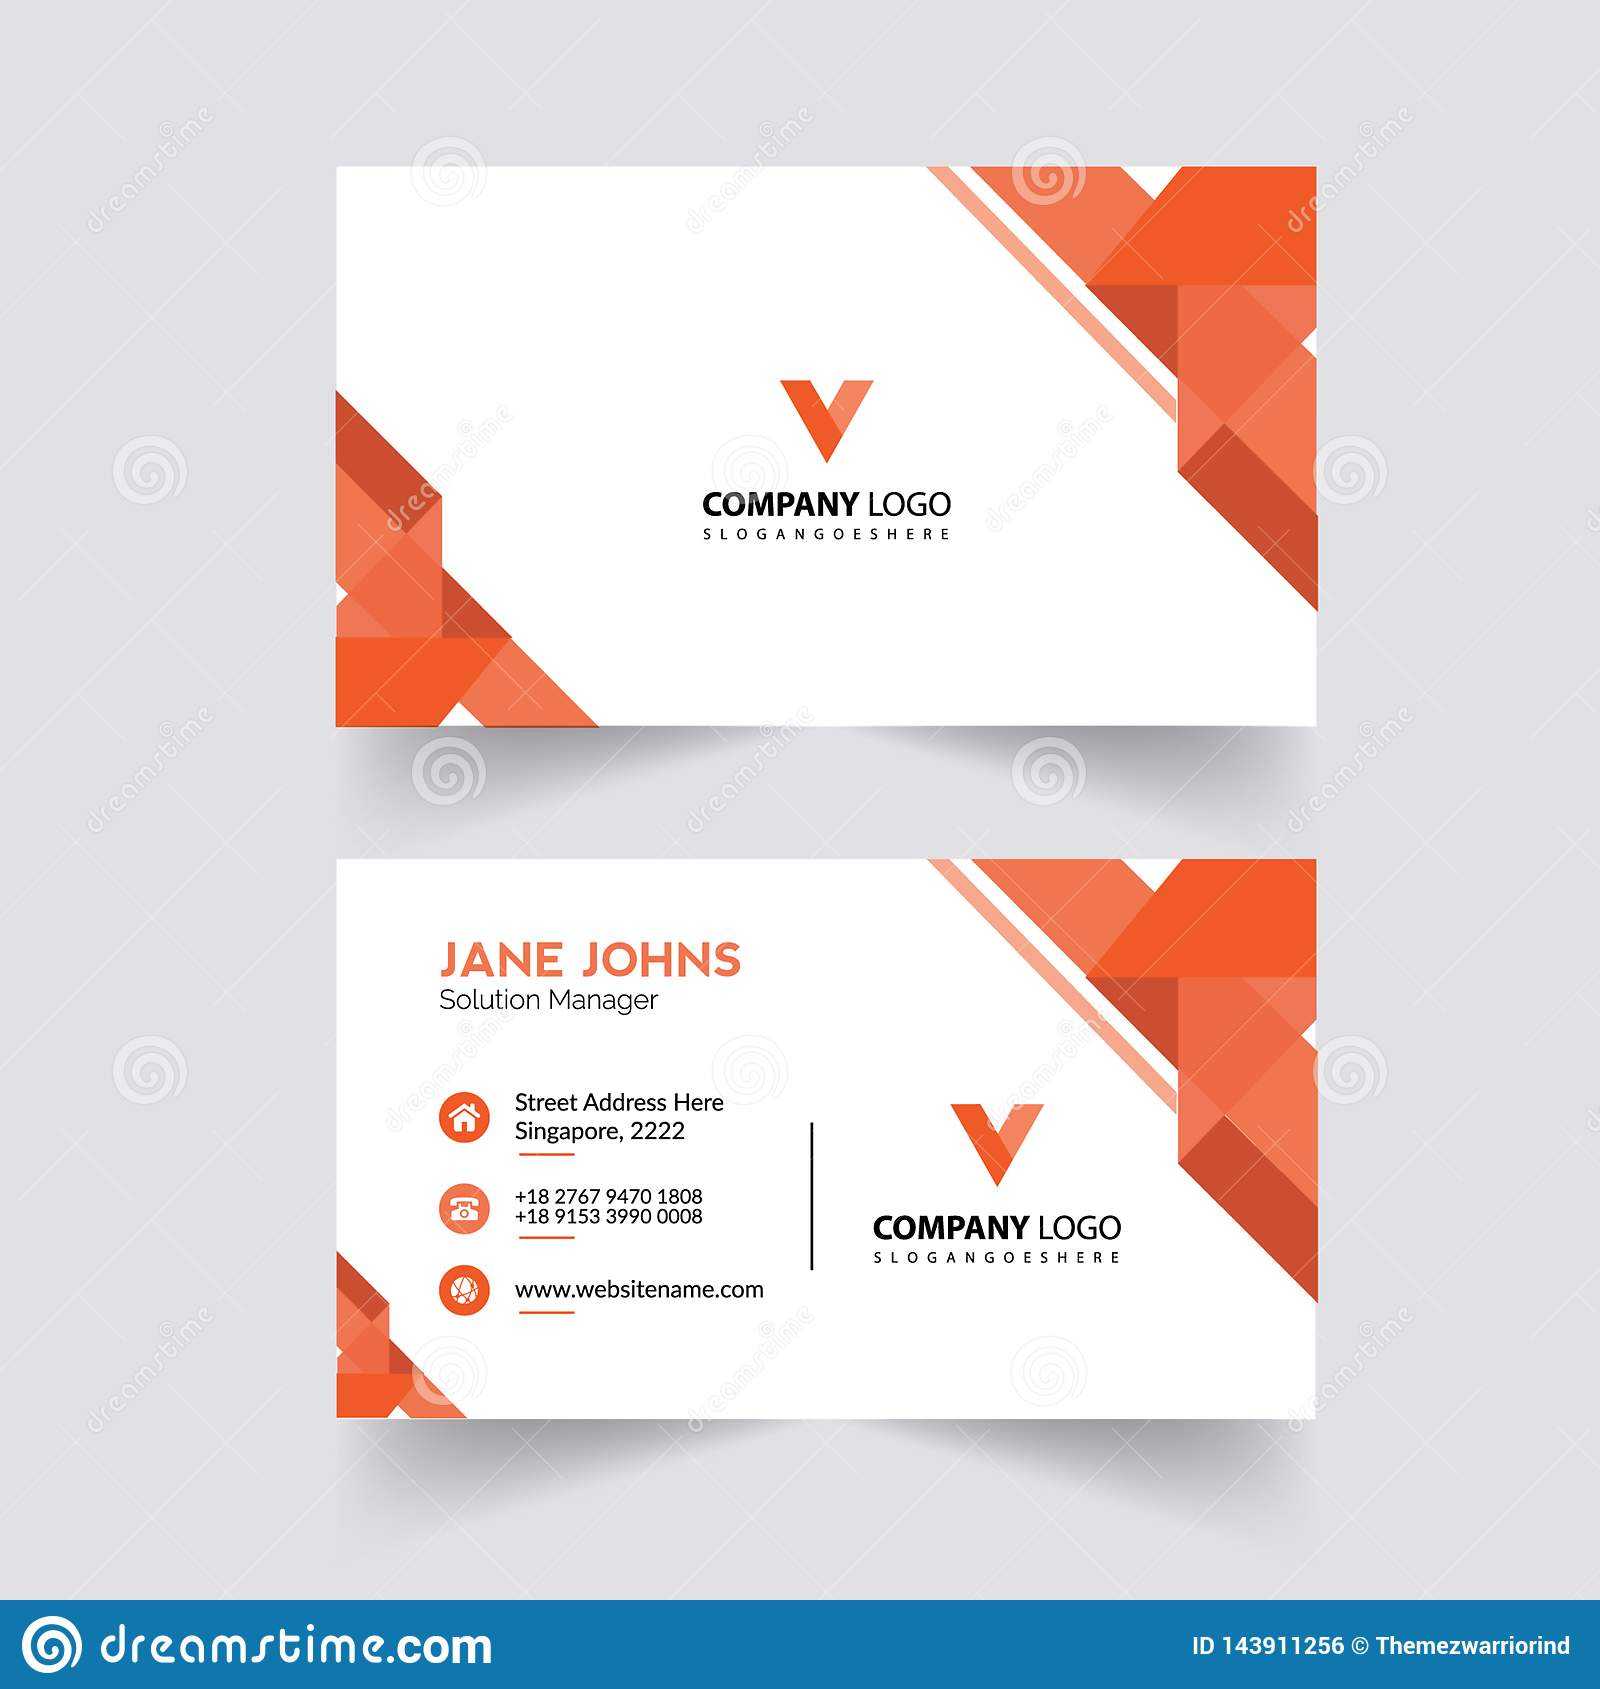 Abstruct Business Card Template Stock Illustration Inside Adobe Illustrator Business Card Template